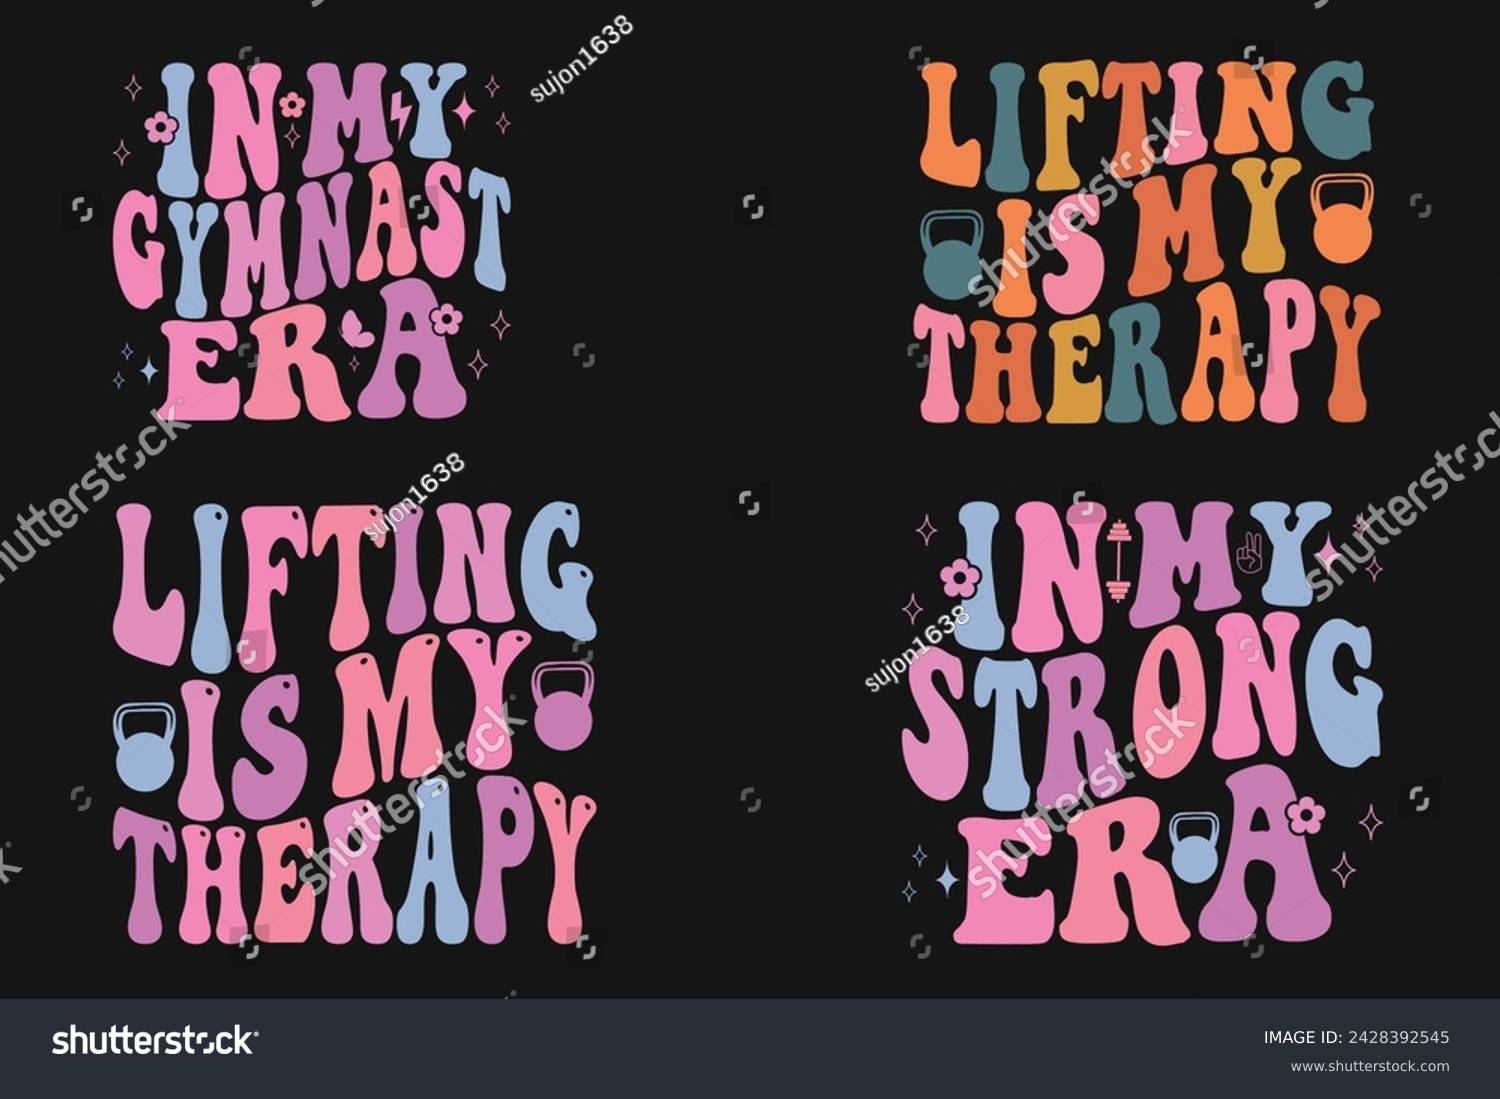 SVG of In My Gymnast Era, Lifting Is My Therapy, in my Strong era retro T-shirt designs svg